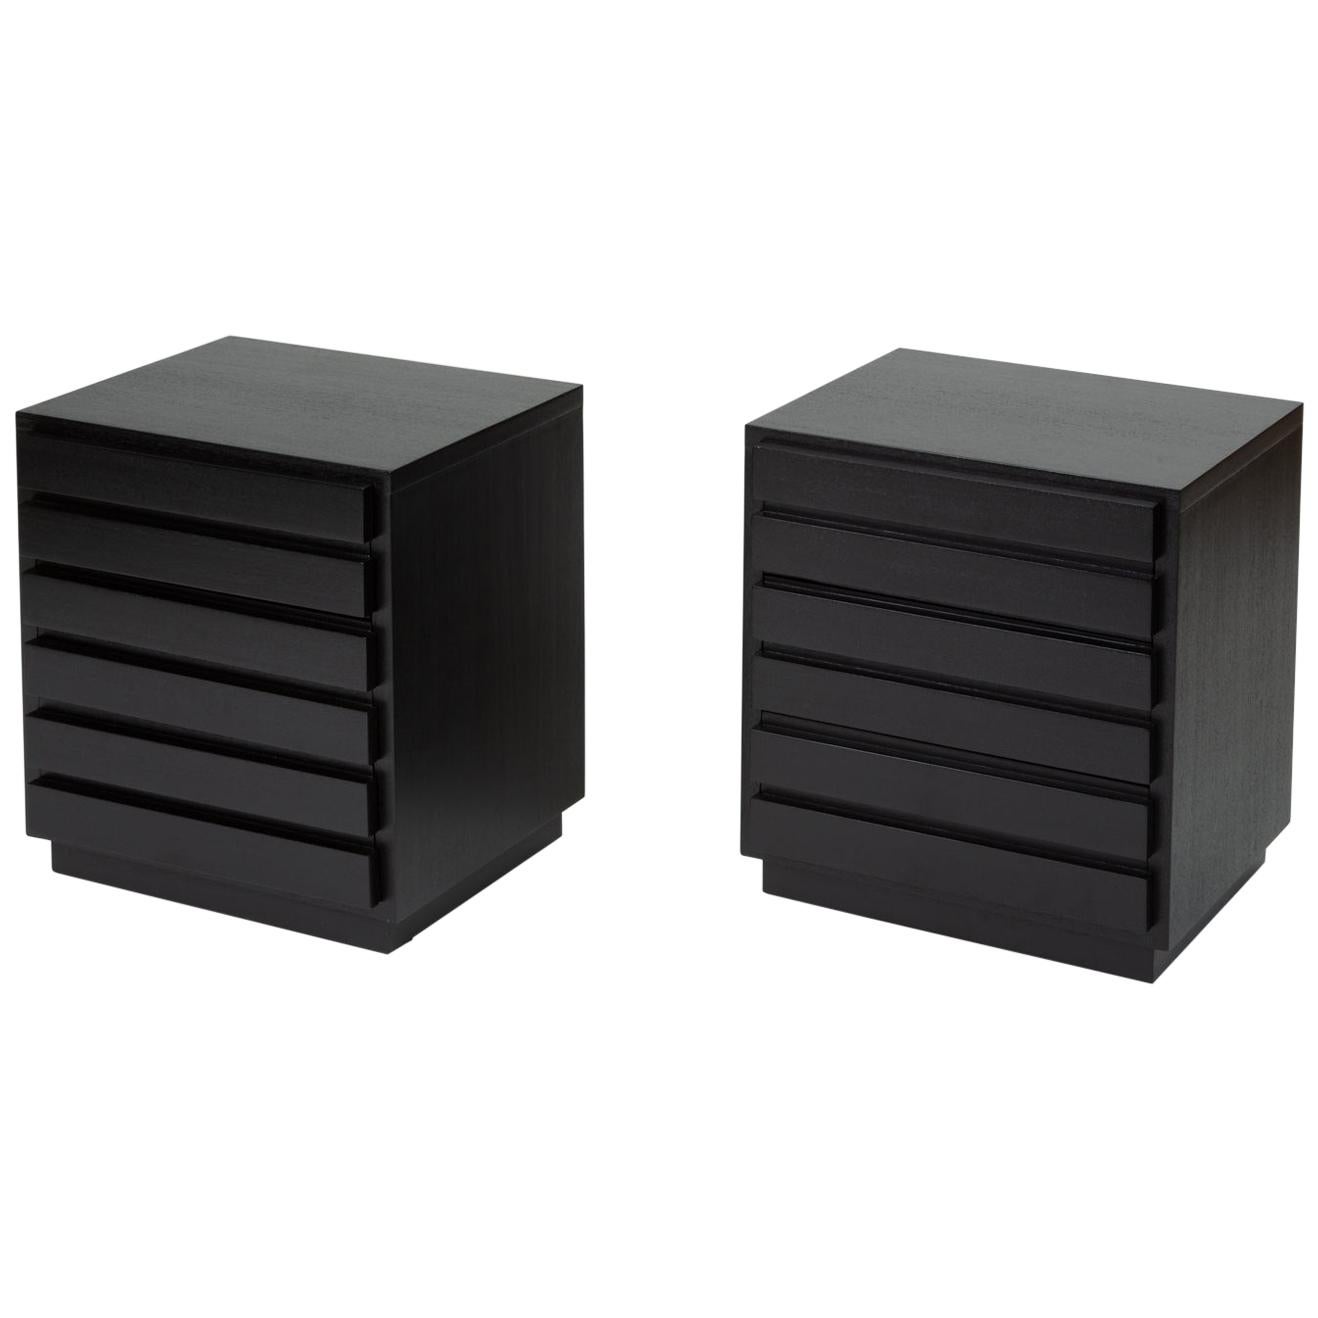 Pair of Ebonized Three-Drawer Nightstands by American of Martinsville